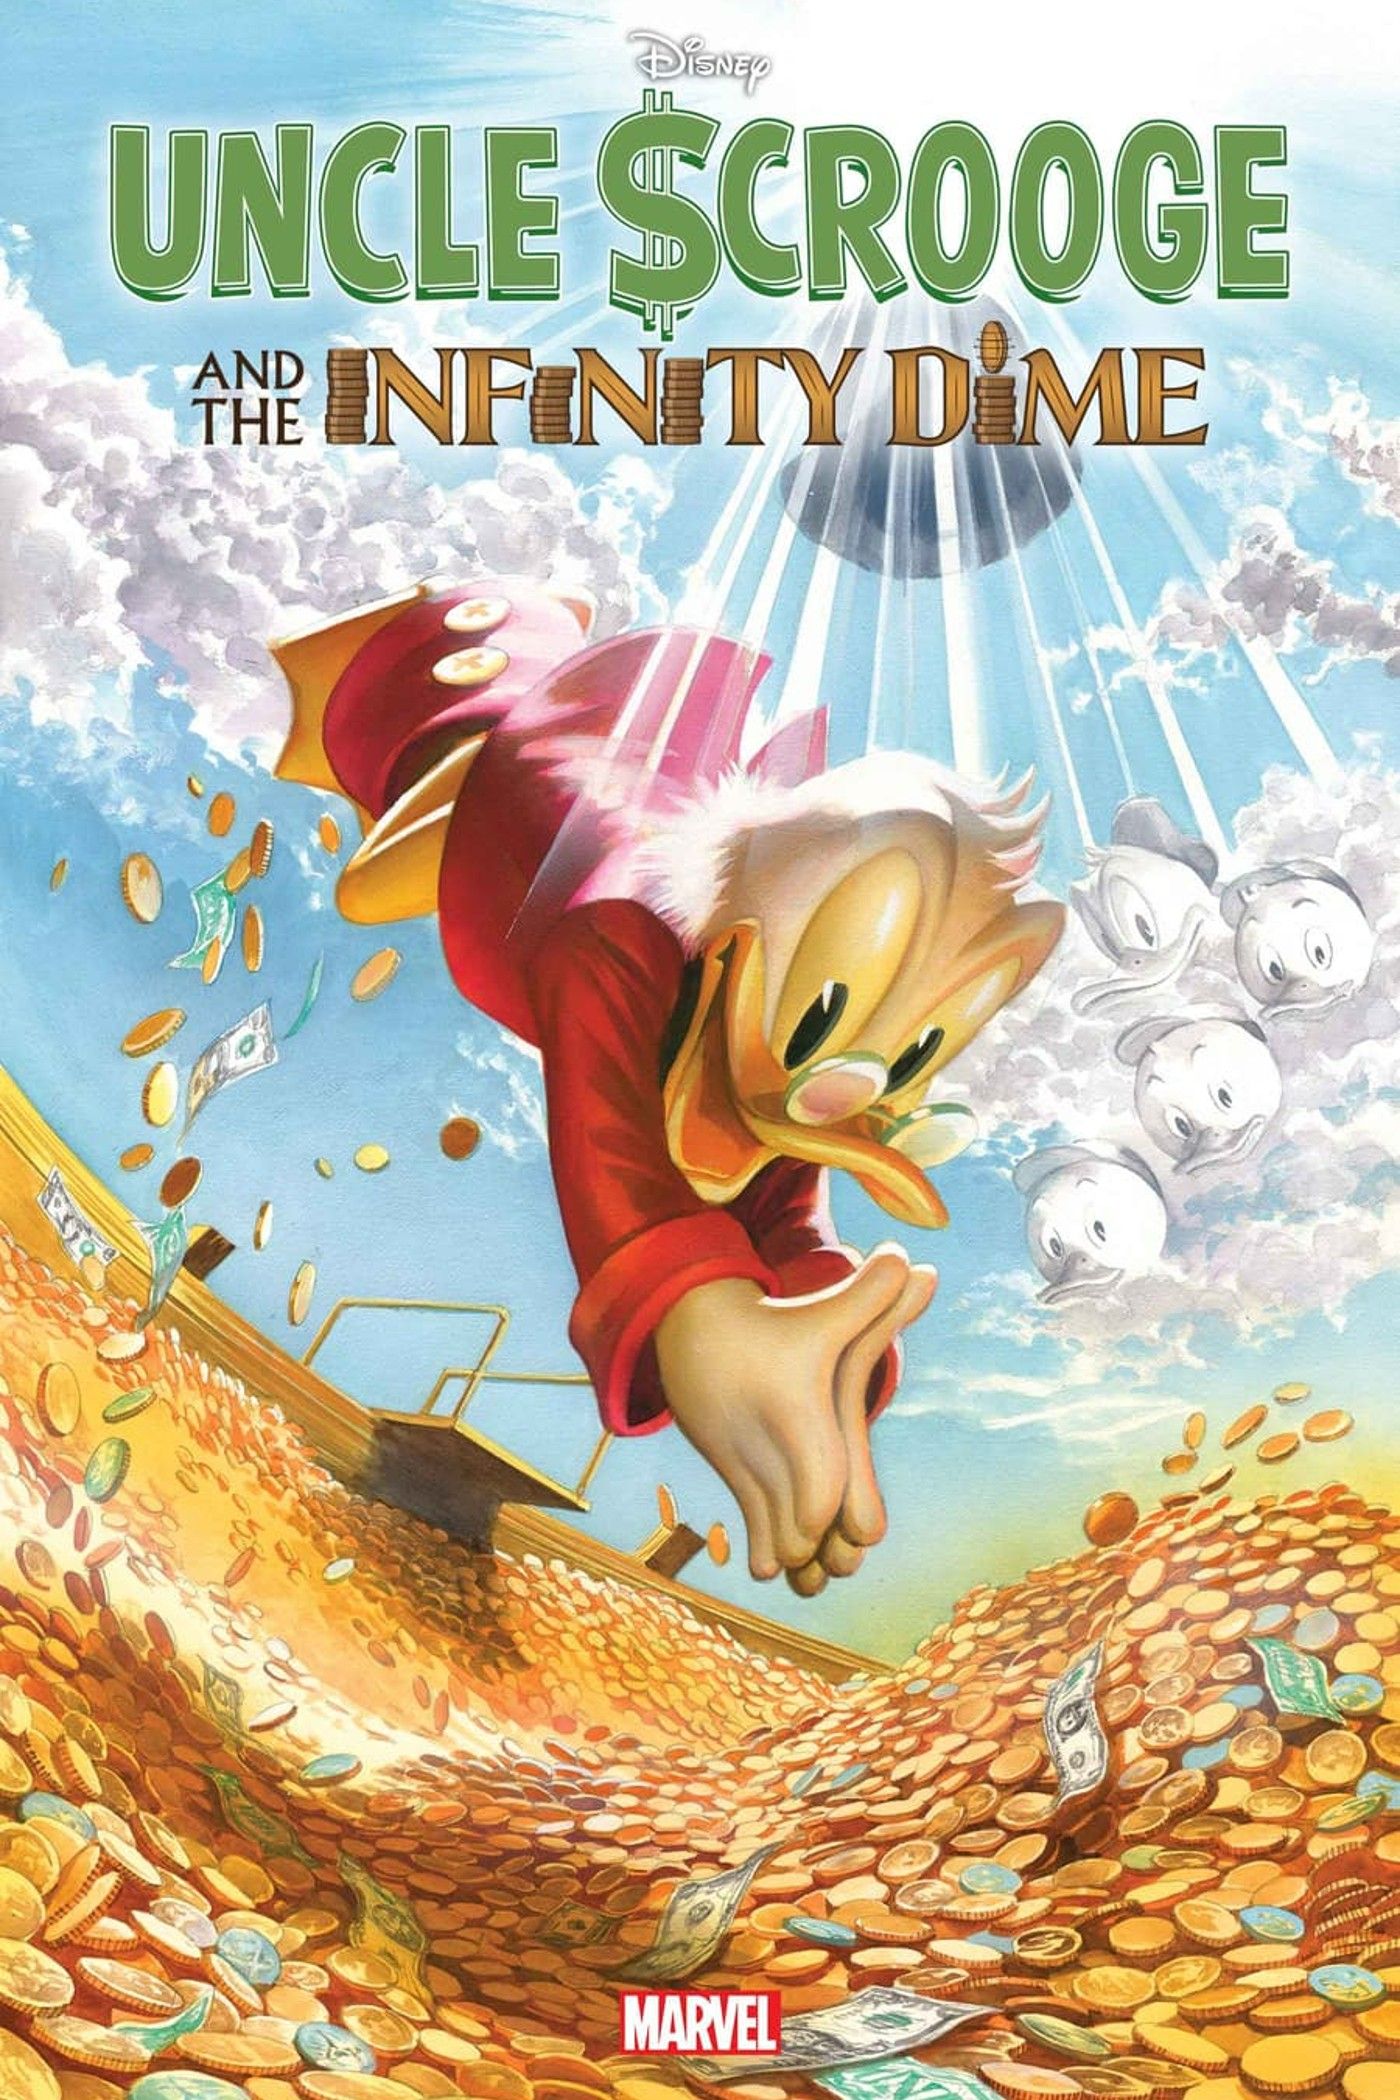 Scrooge McDuck dives into a field of gold coins and dollar bills while wearing a red coat